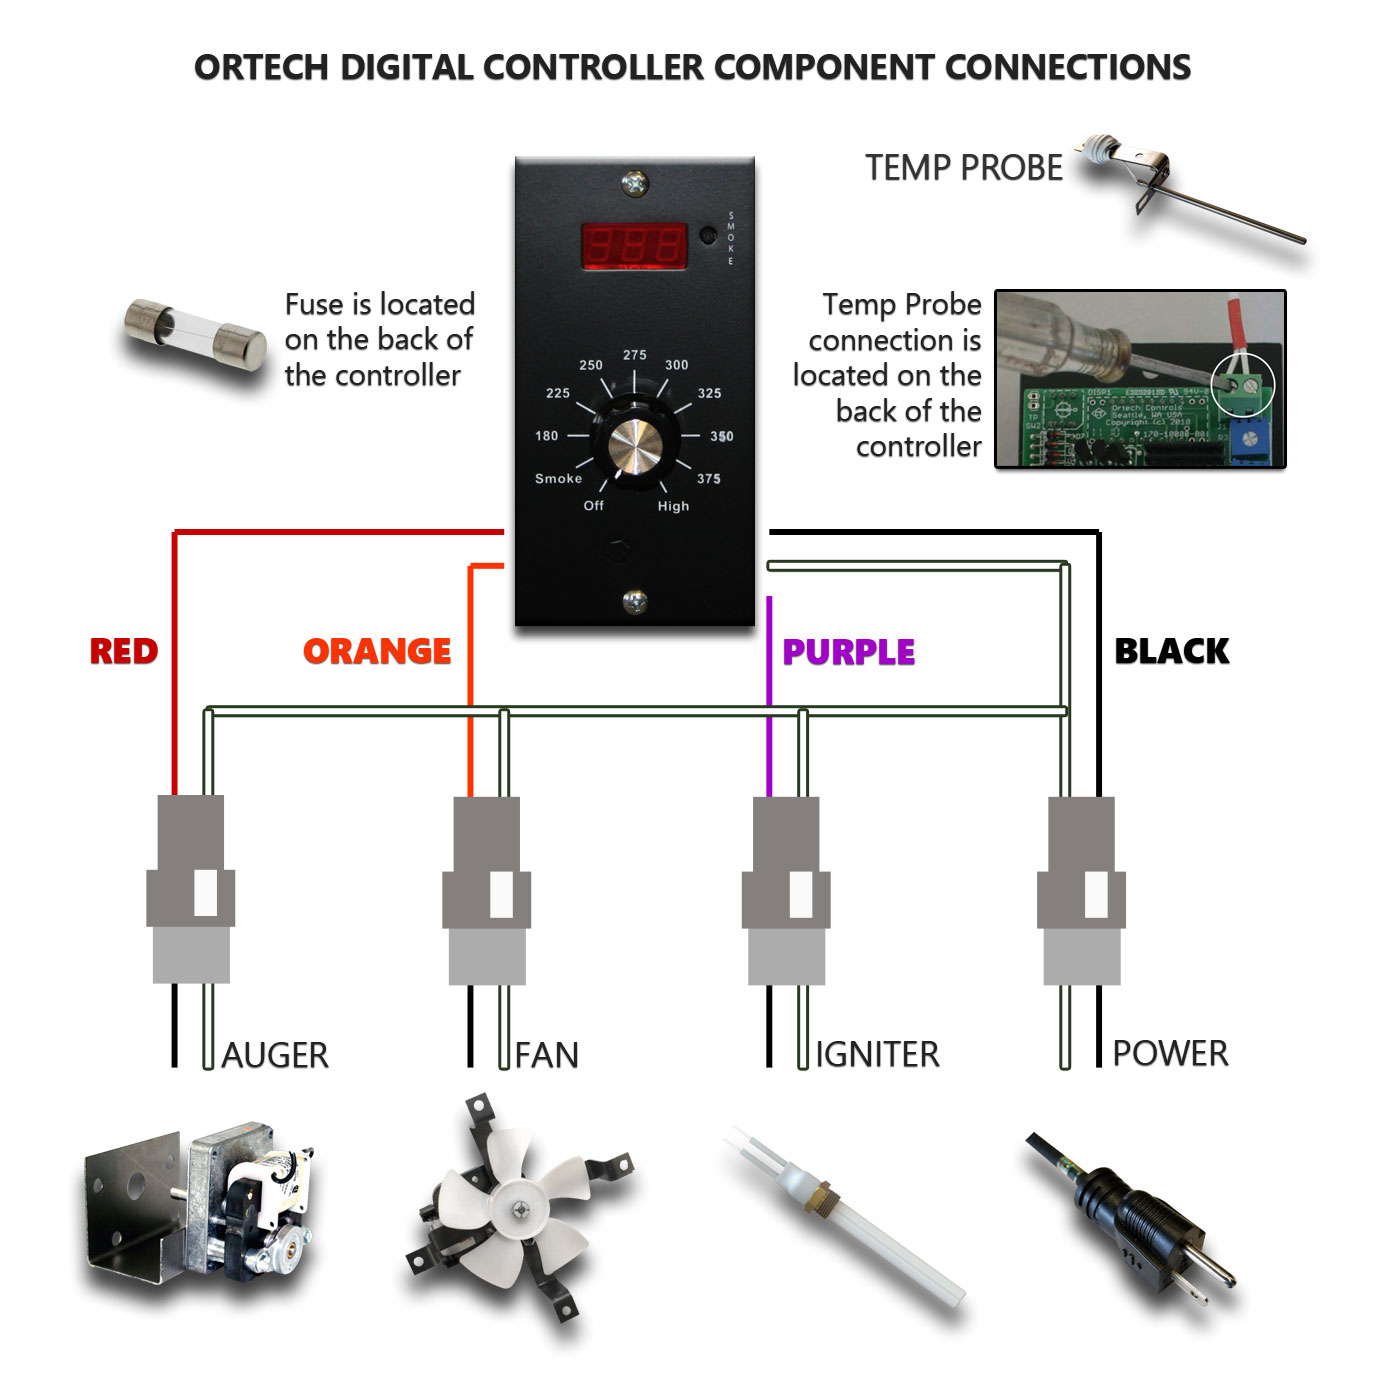 Ortech Digital Controller Grill Connections